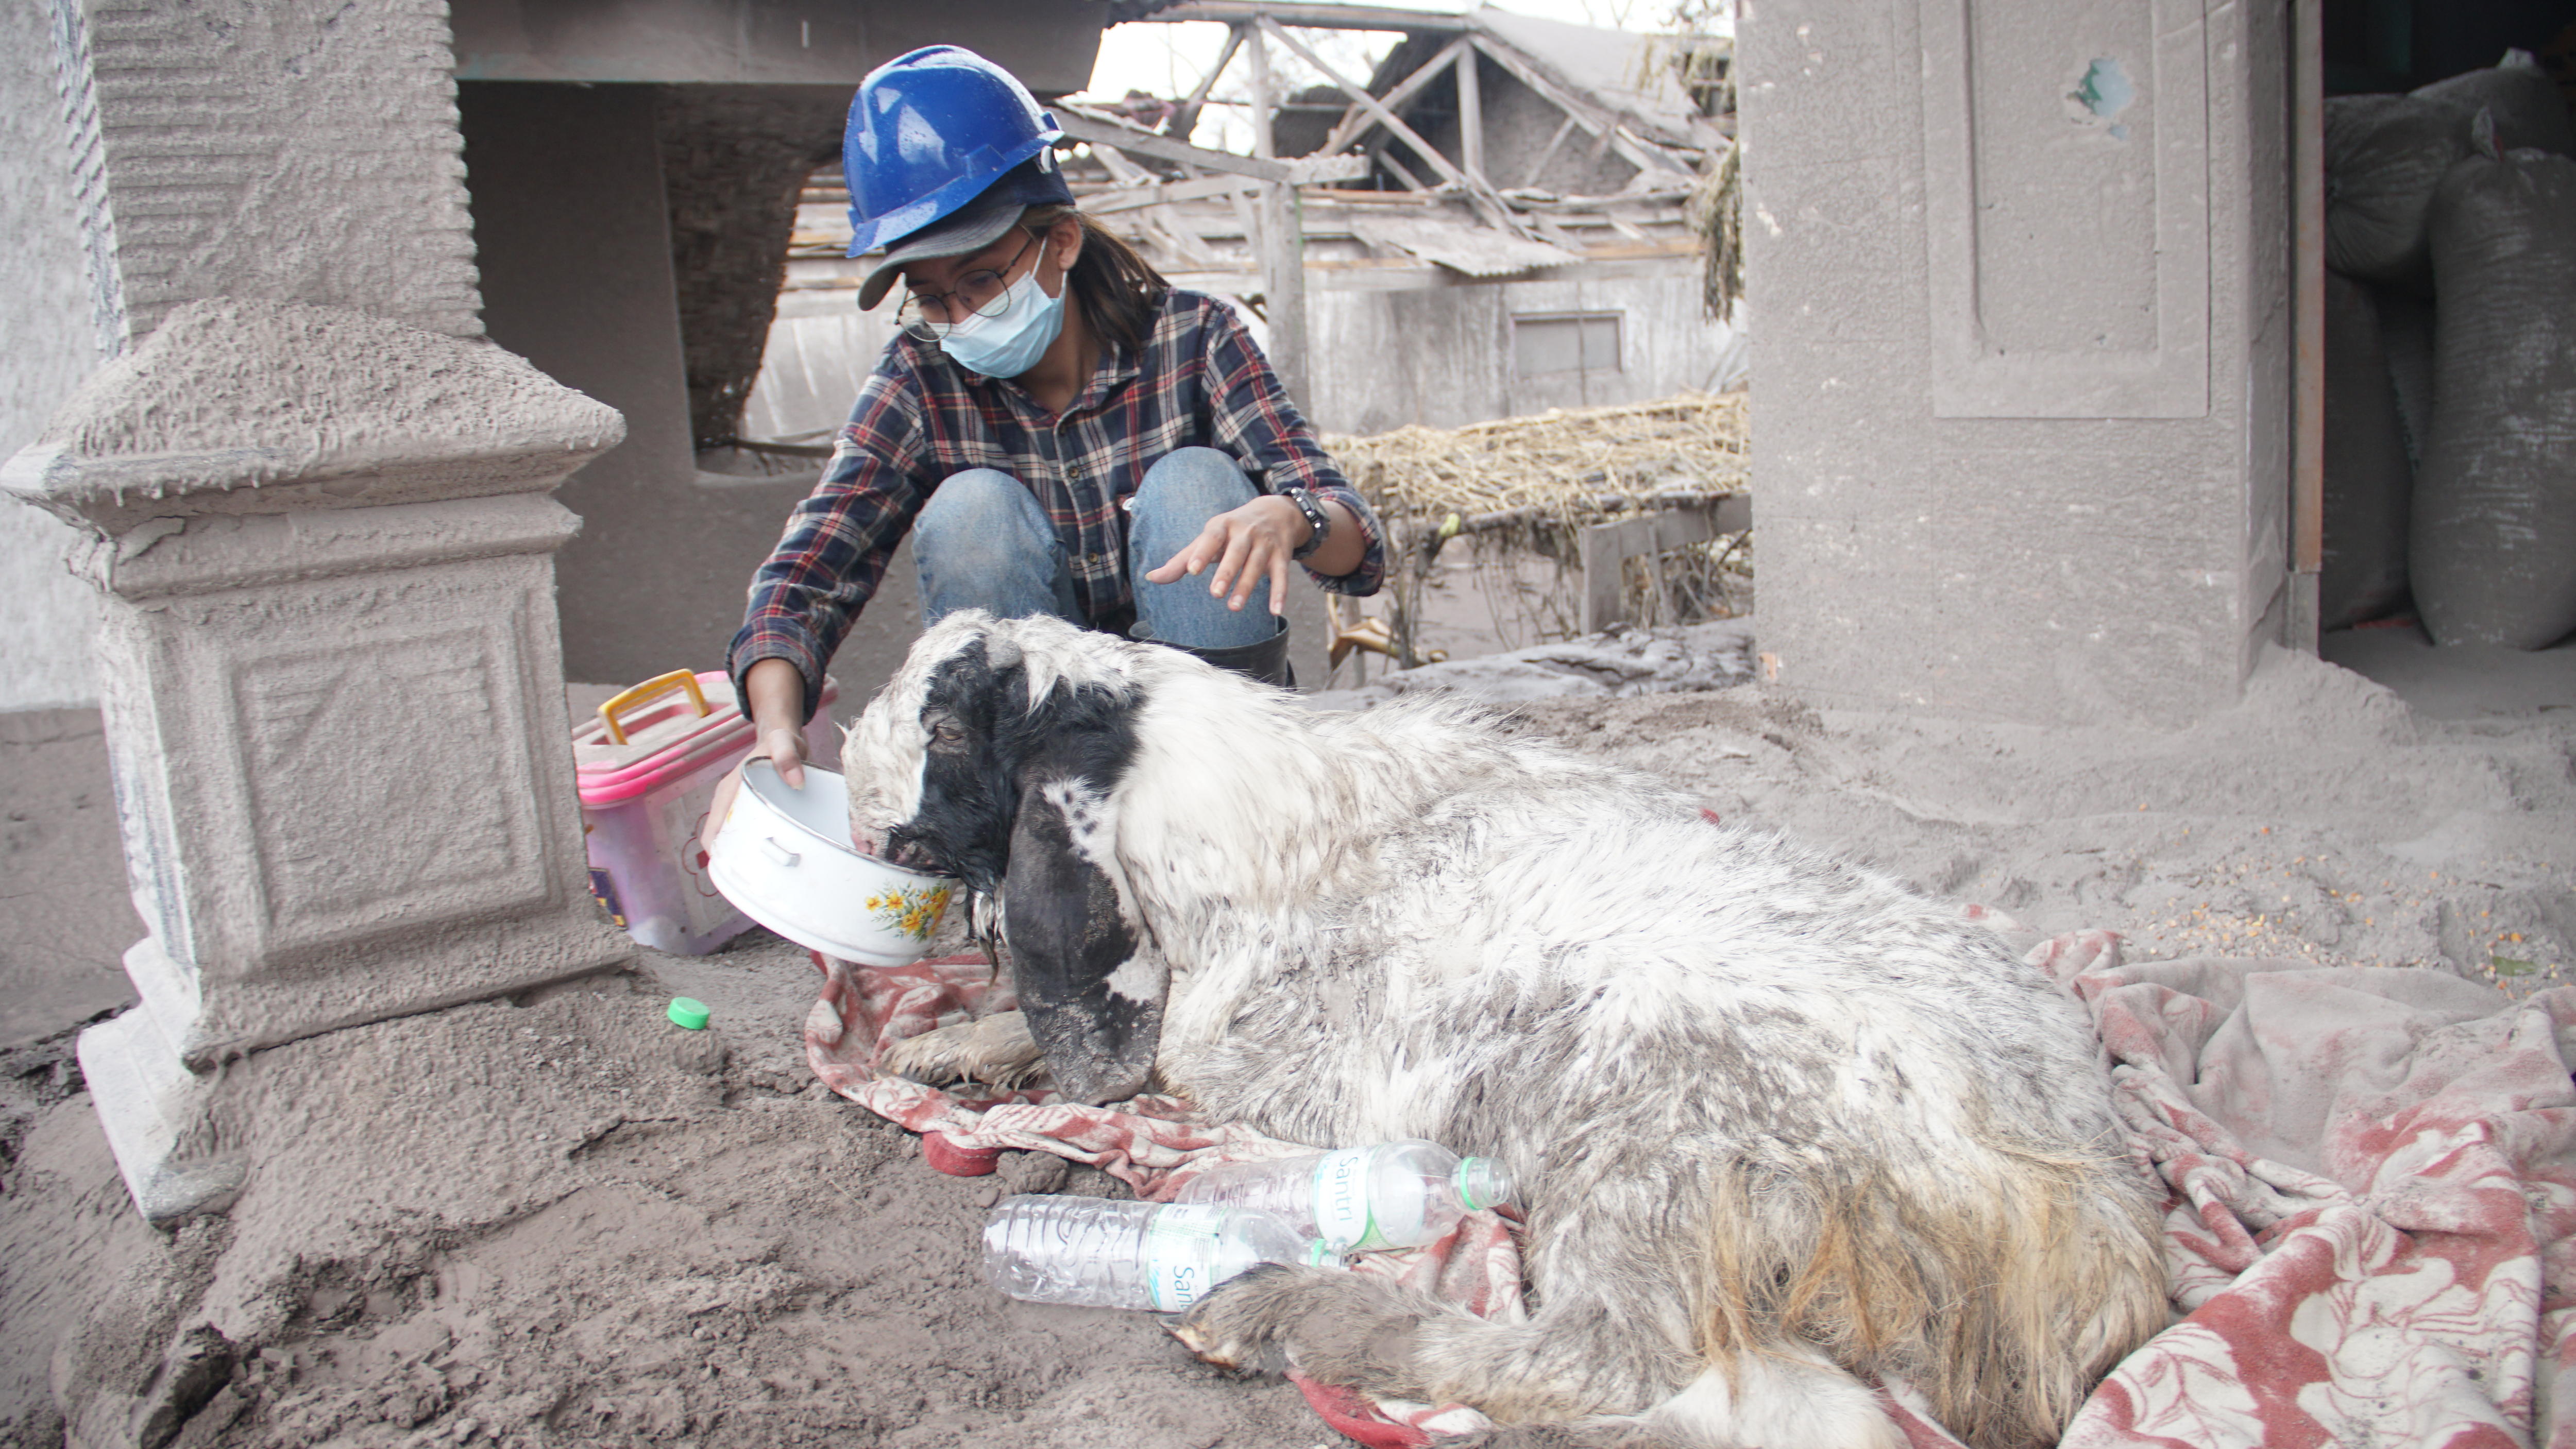 A goat covered in ash eats food from a bowl provided by a rescue worker. 